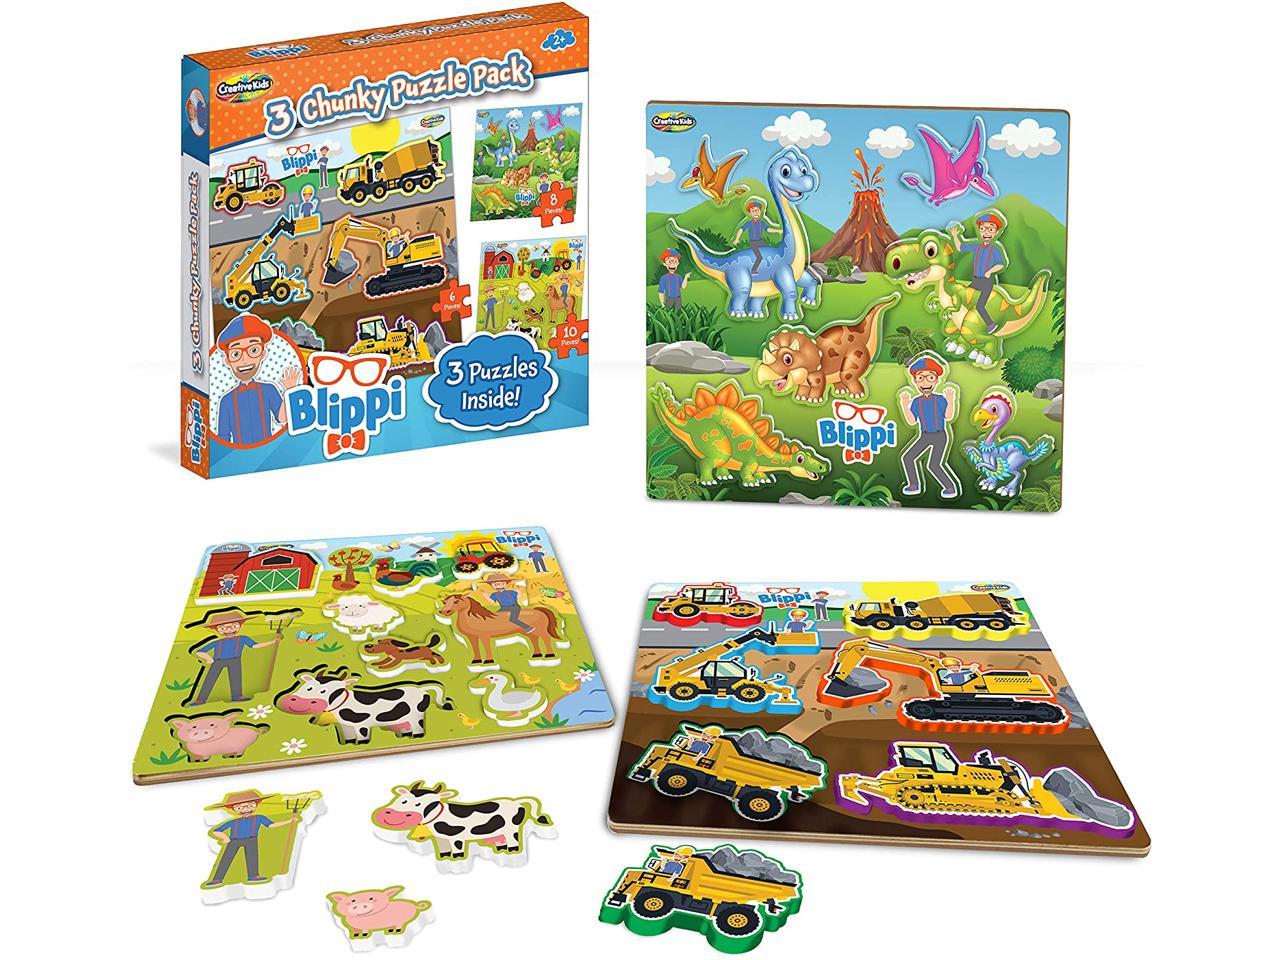 Blippi Chunky Puzzles for Toddlers - 3-in-1 Chunky Puzzle Set for Kids Ages  2+ - Wooden Animal Puzzle for 2 Year Old - Baby Puzzle with Big Dinosaurs  and Construction Pieces -